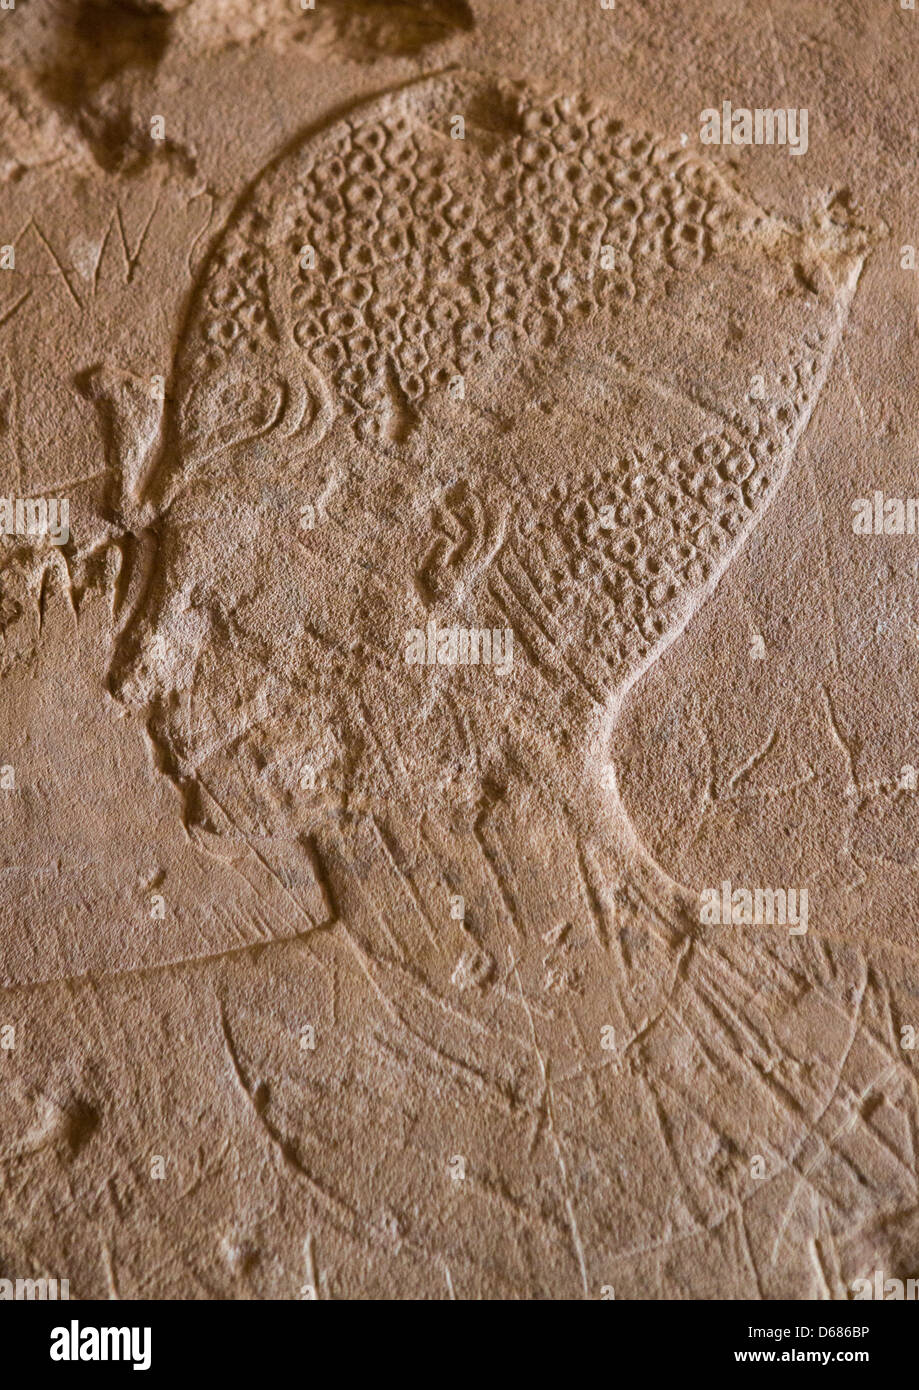 relief-in-the-semna-temple-at-the-national-museum-of-sudan-khartoum-D686BP.jpg